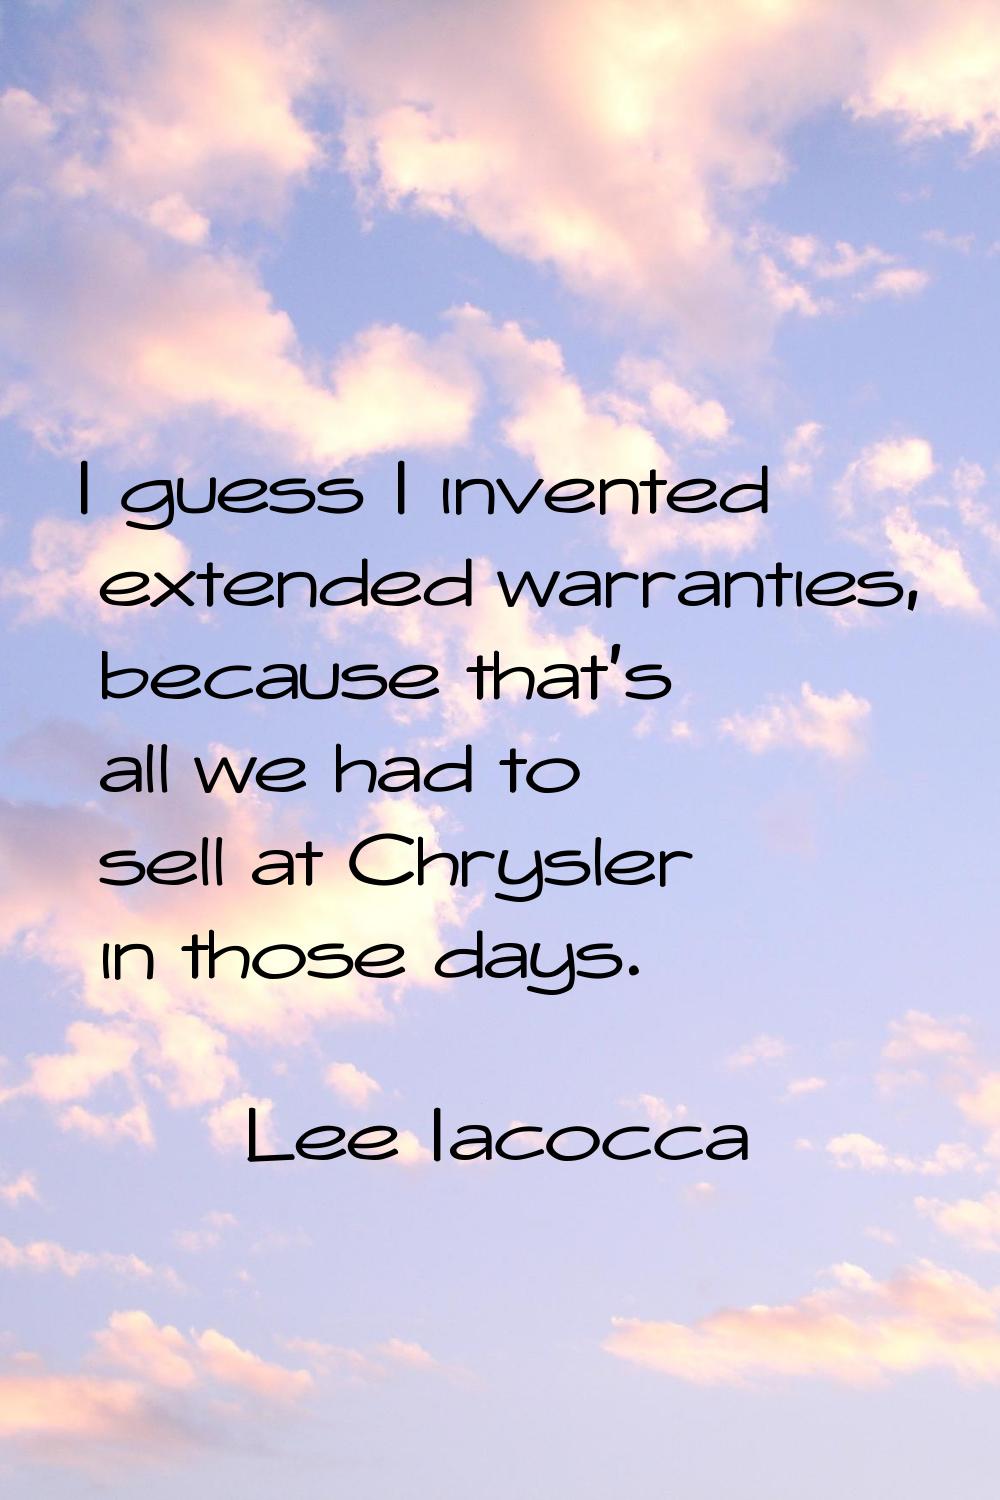 I guess I invented extended warranties, because that's all we had to sell at Chrysler in those days